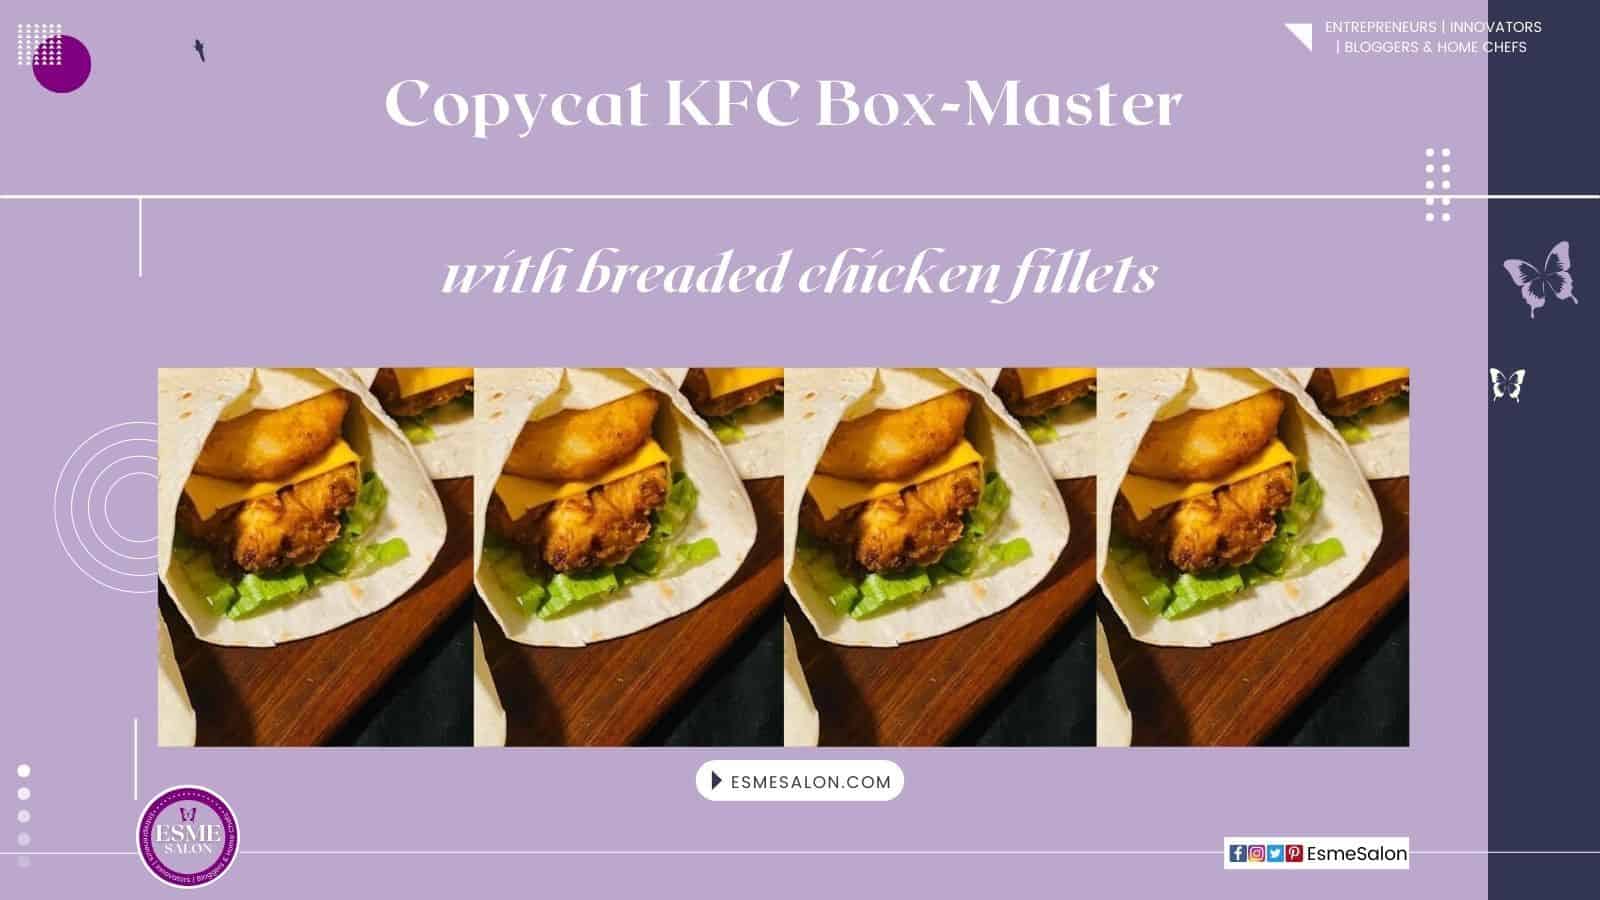 4 KFC Box-Master made with breaded chicken fillets